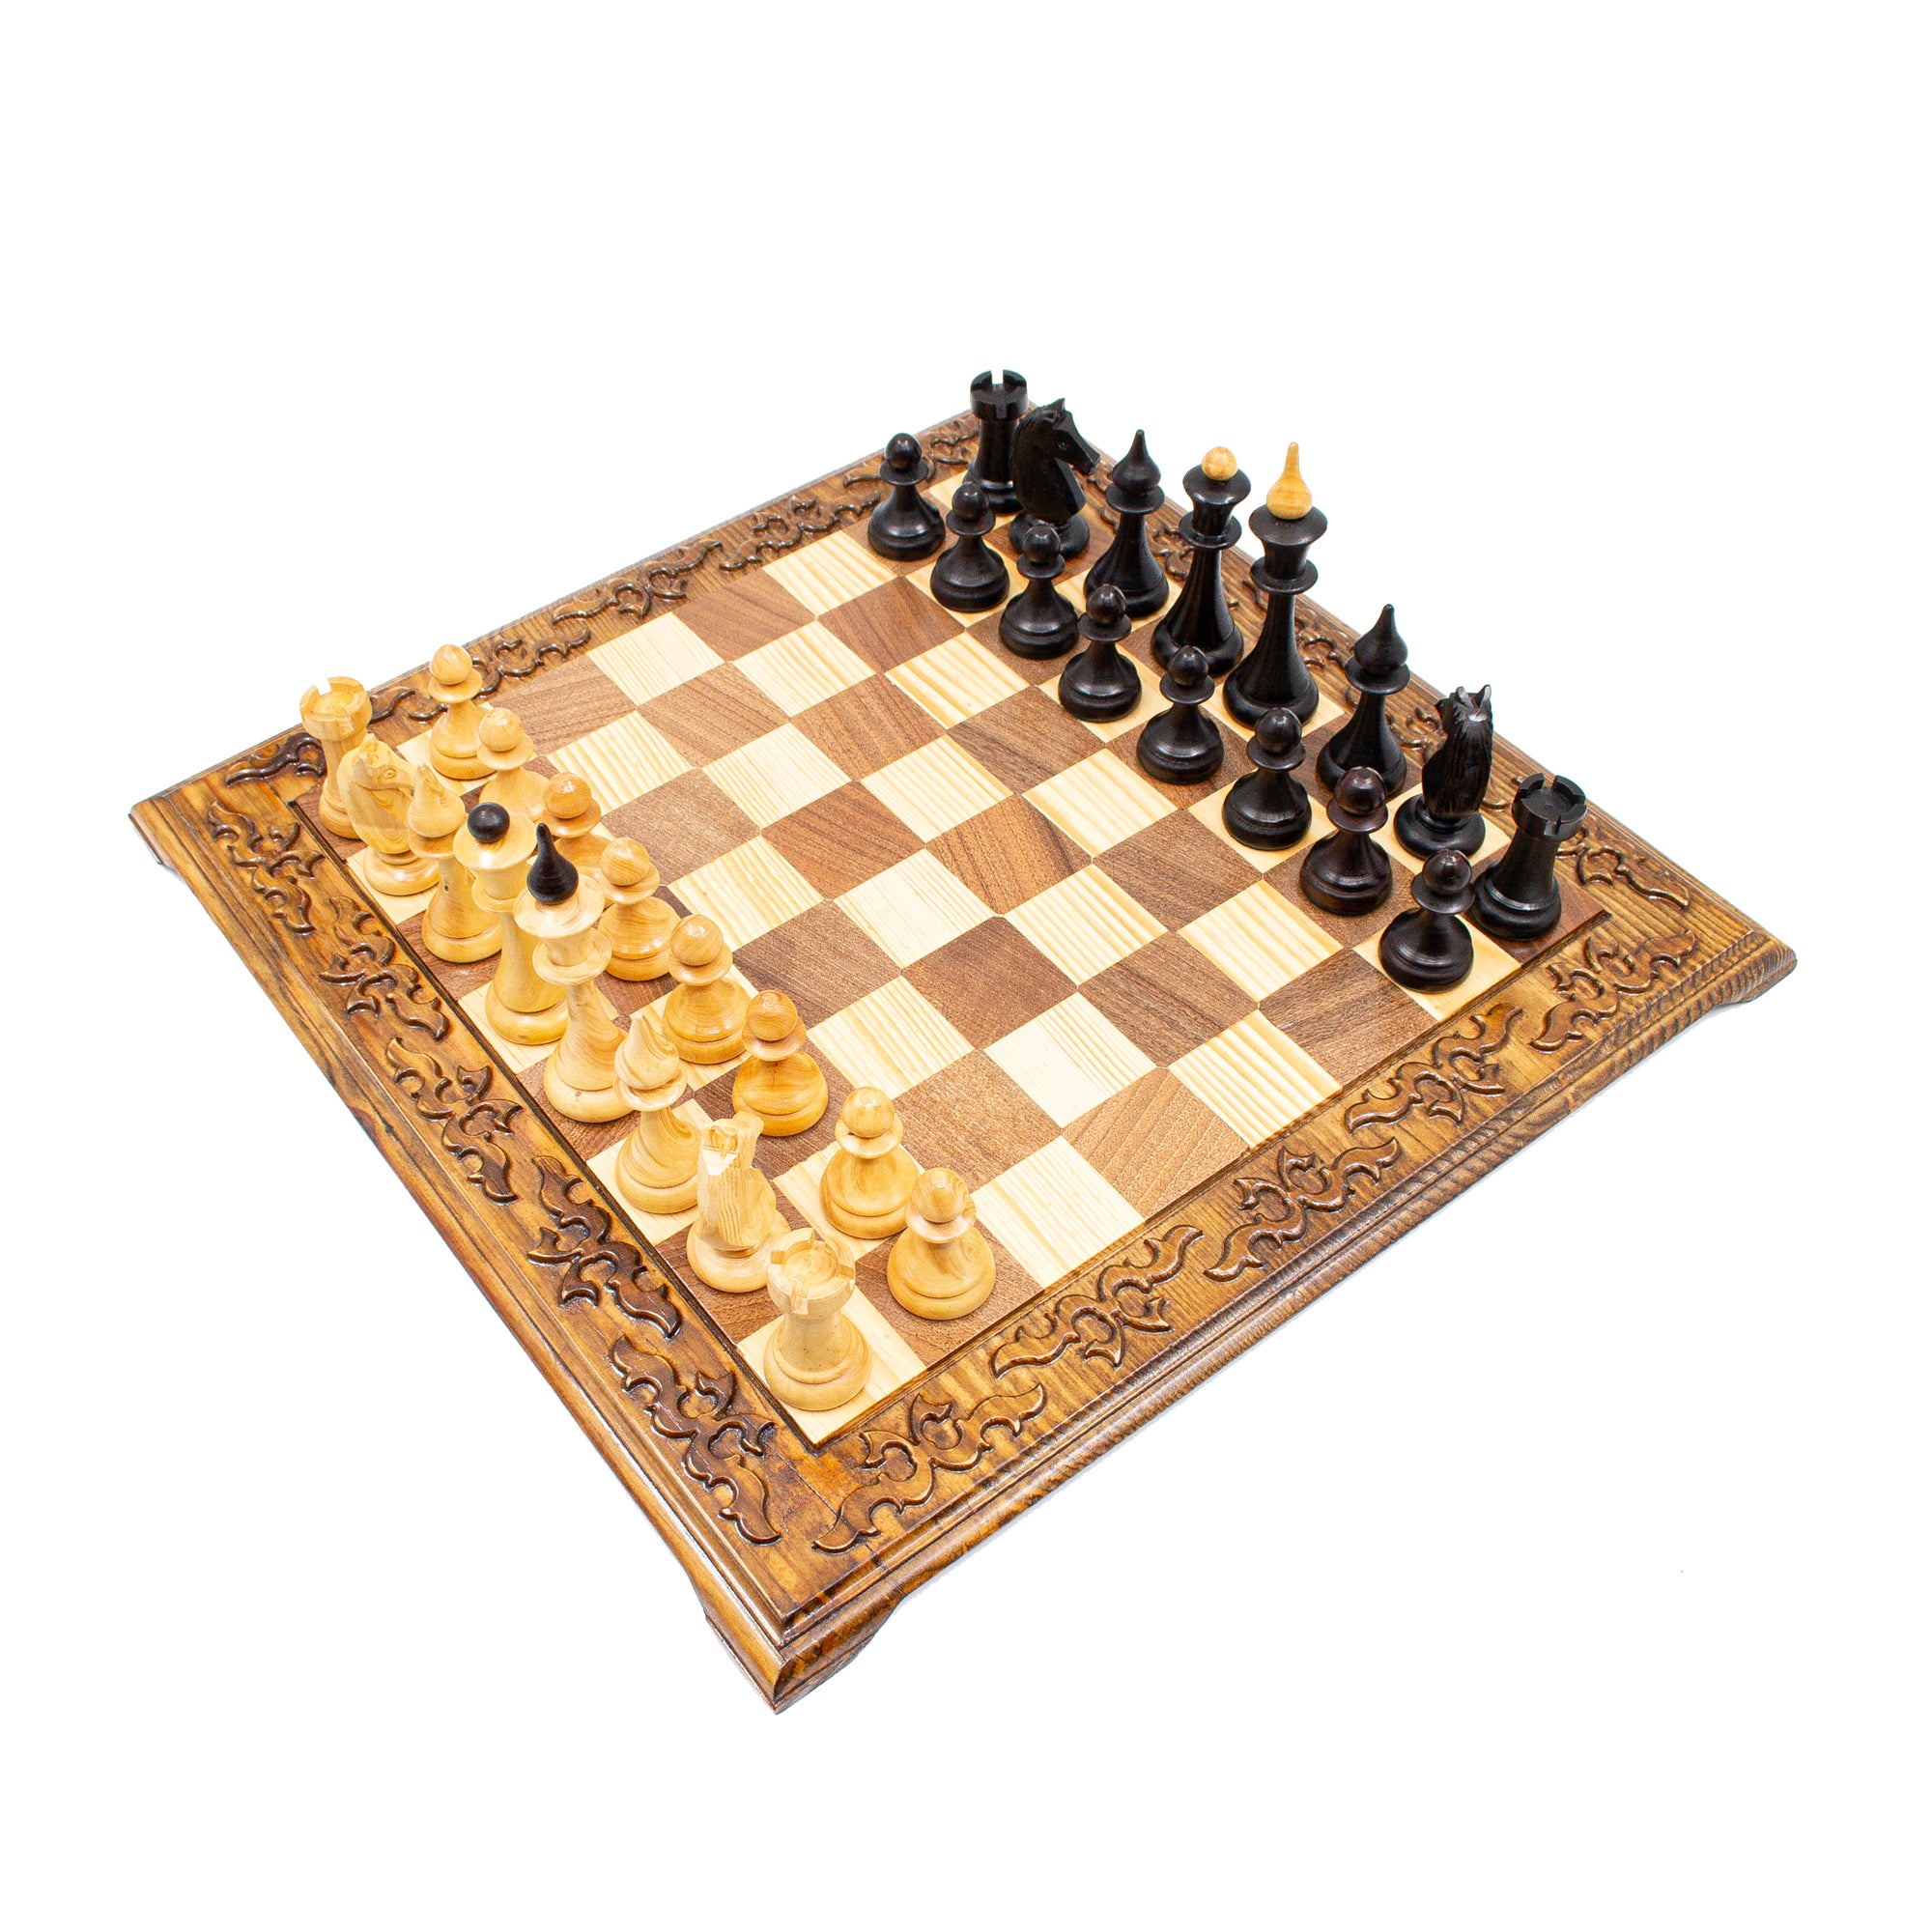 Chess setsChess Sets Discover a large variety of amazing chess sets! From classic wooden sets or themed designs, we have options to suit every taste. Whether you're a seasoned pro or new to the game, our selection caters to all levels. Explore our selecti